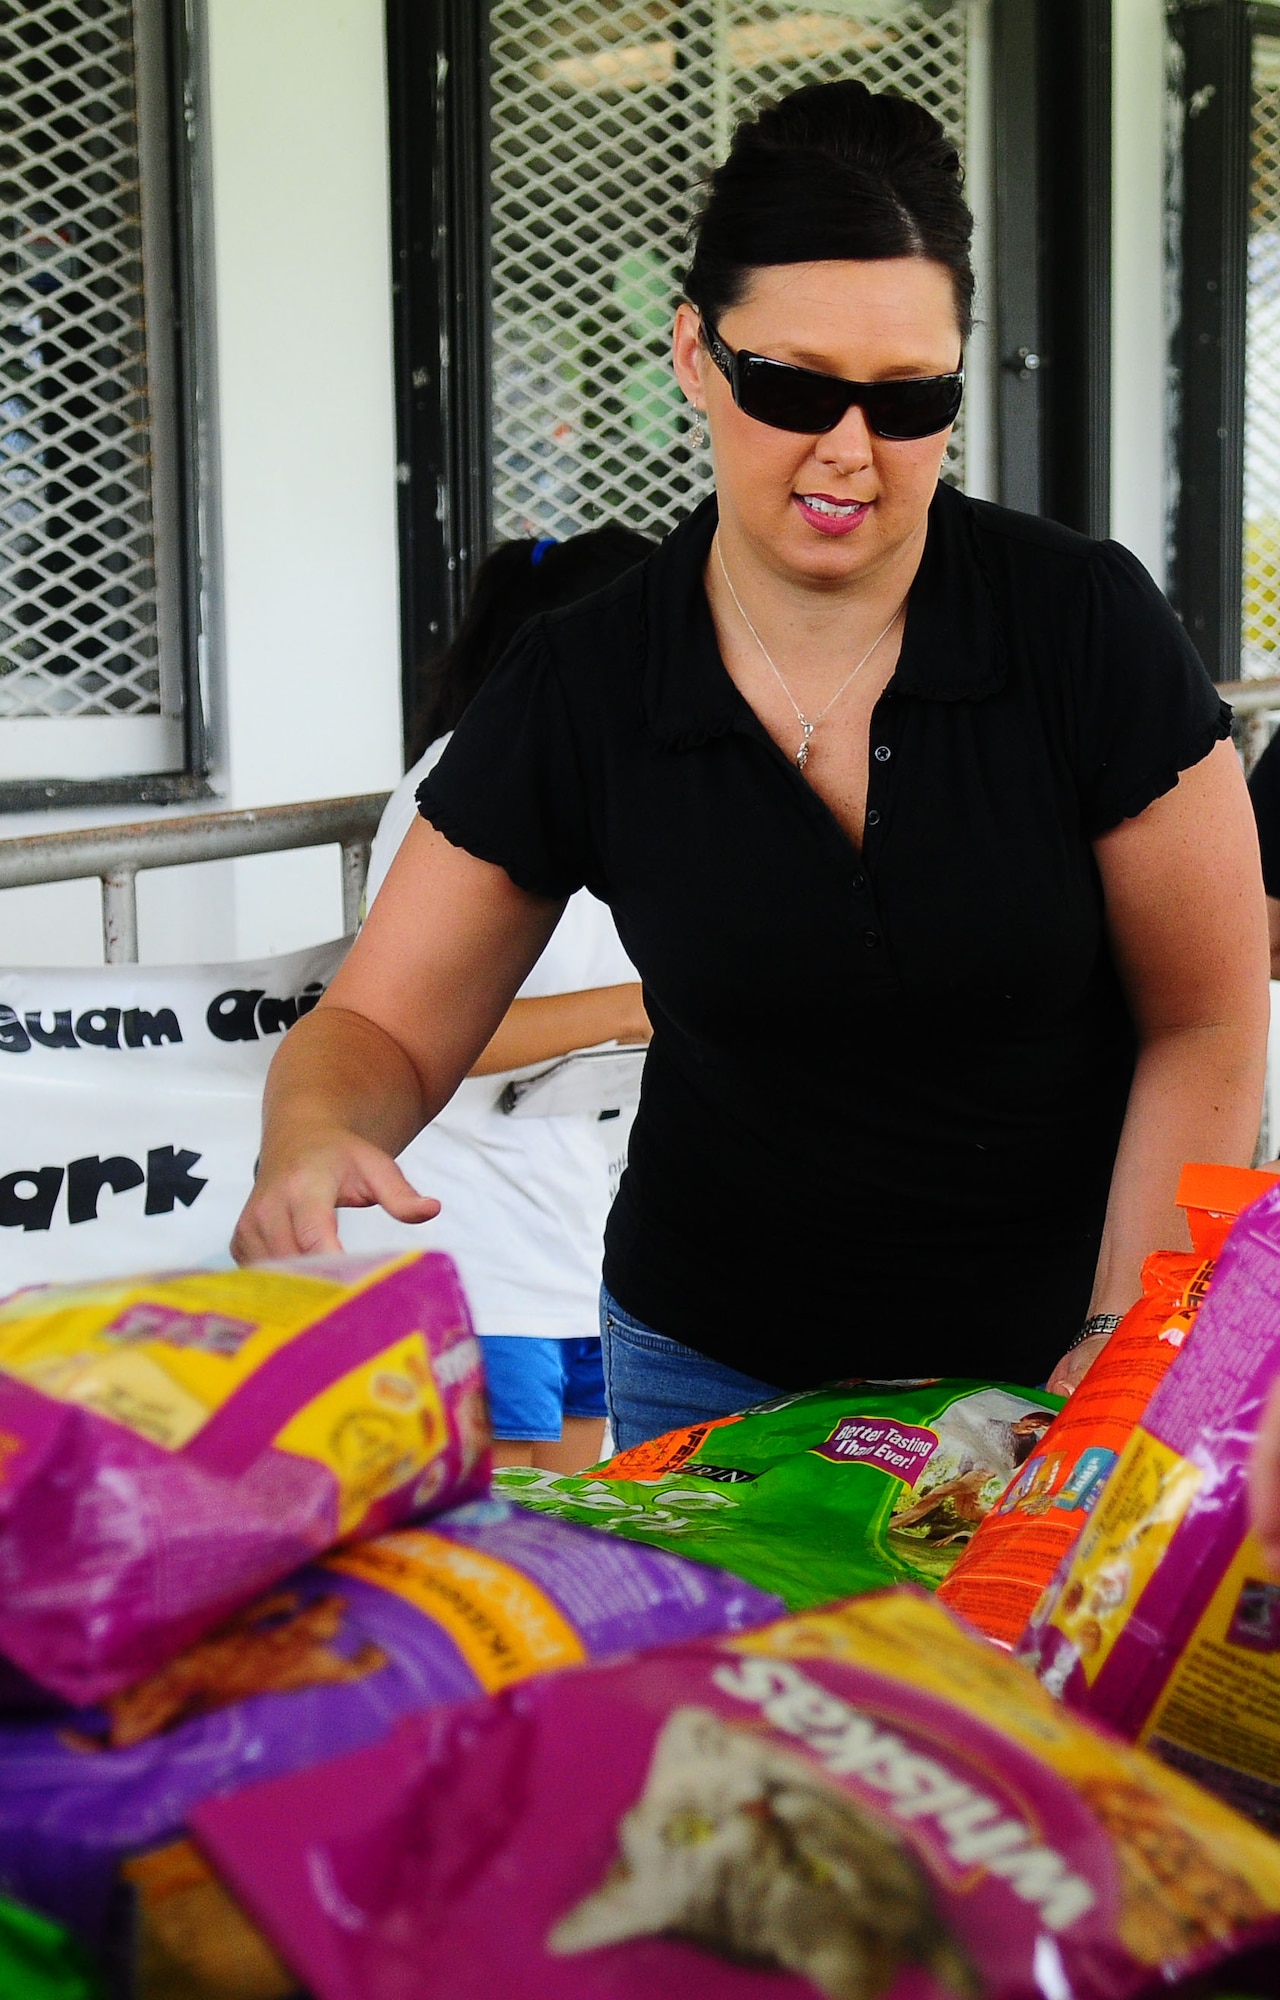 Debra Papalia, President of the Enlisted Spouse’s Club, unloads bags of dog and cat food at the Guam Animals In Need shelter in Yigo Sept. 21. The club hosted a bake sale to help replenish the shelter’s depleted supply after a robbery in early Sept. (U.S. Air Force photo by Airman Whitney Amstutz)